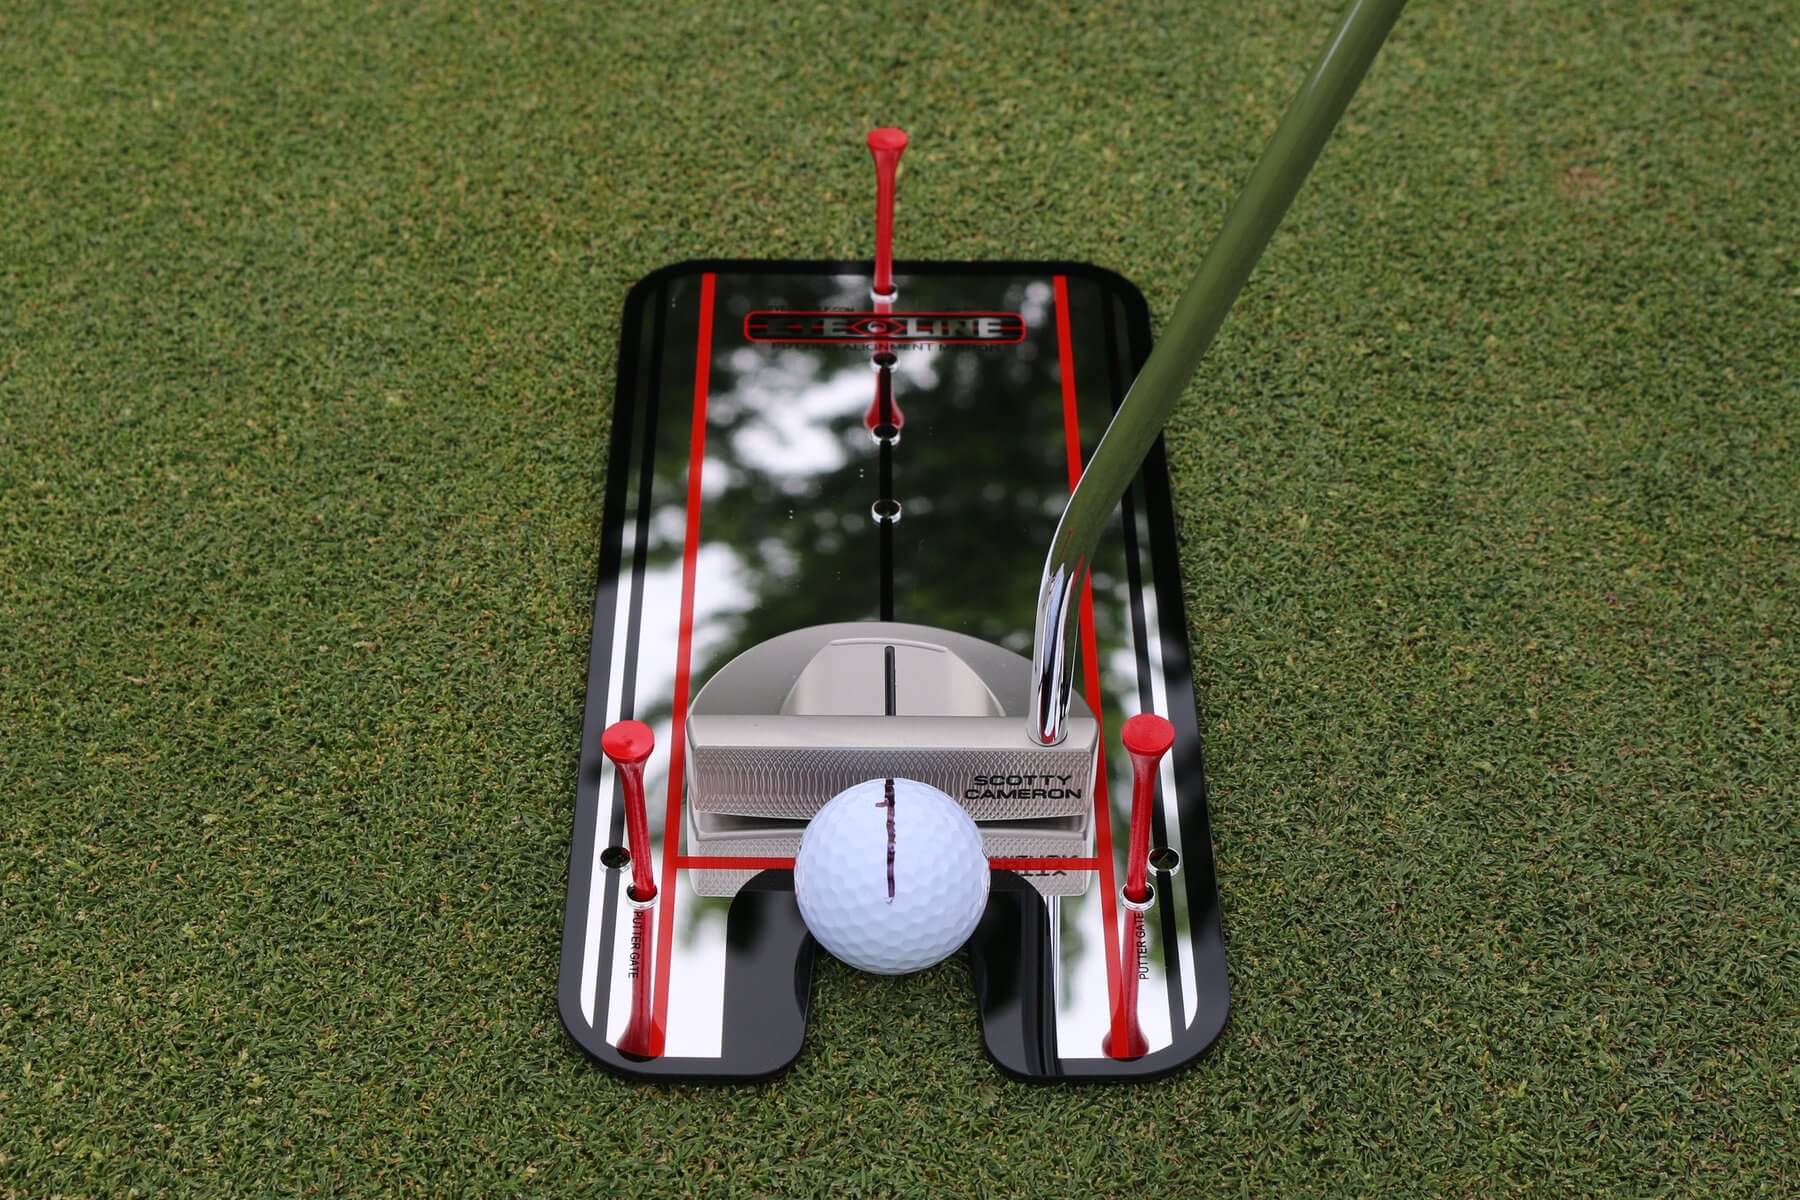 How to Get Better at Golf - EyeLine Golf Putting Mirror